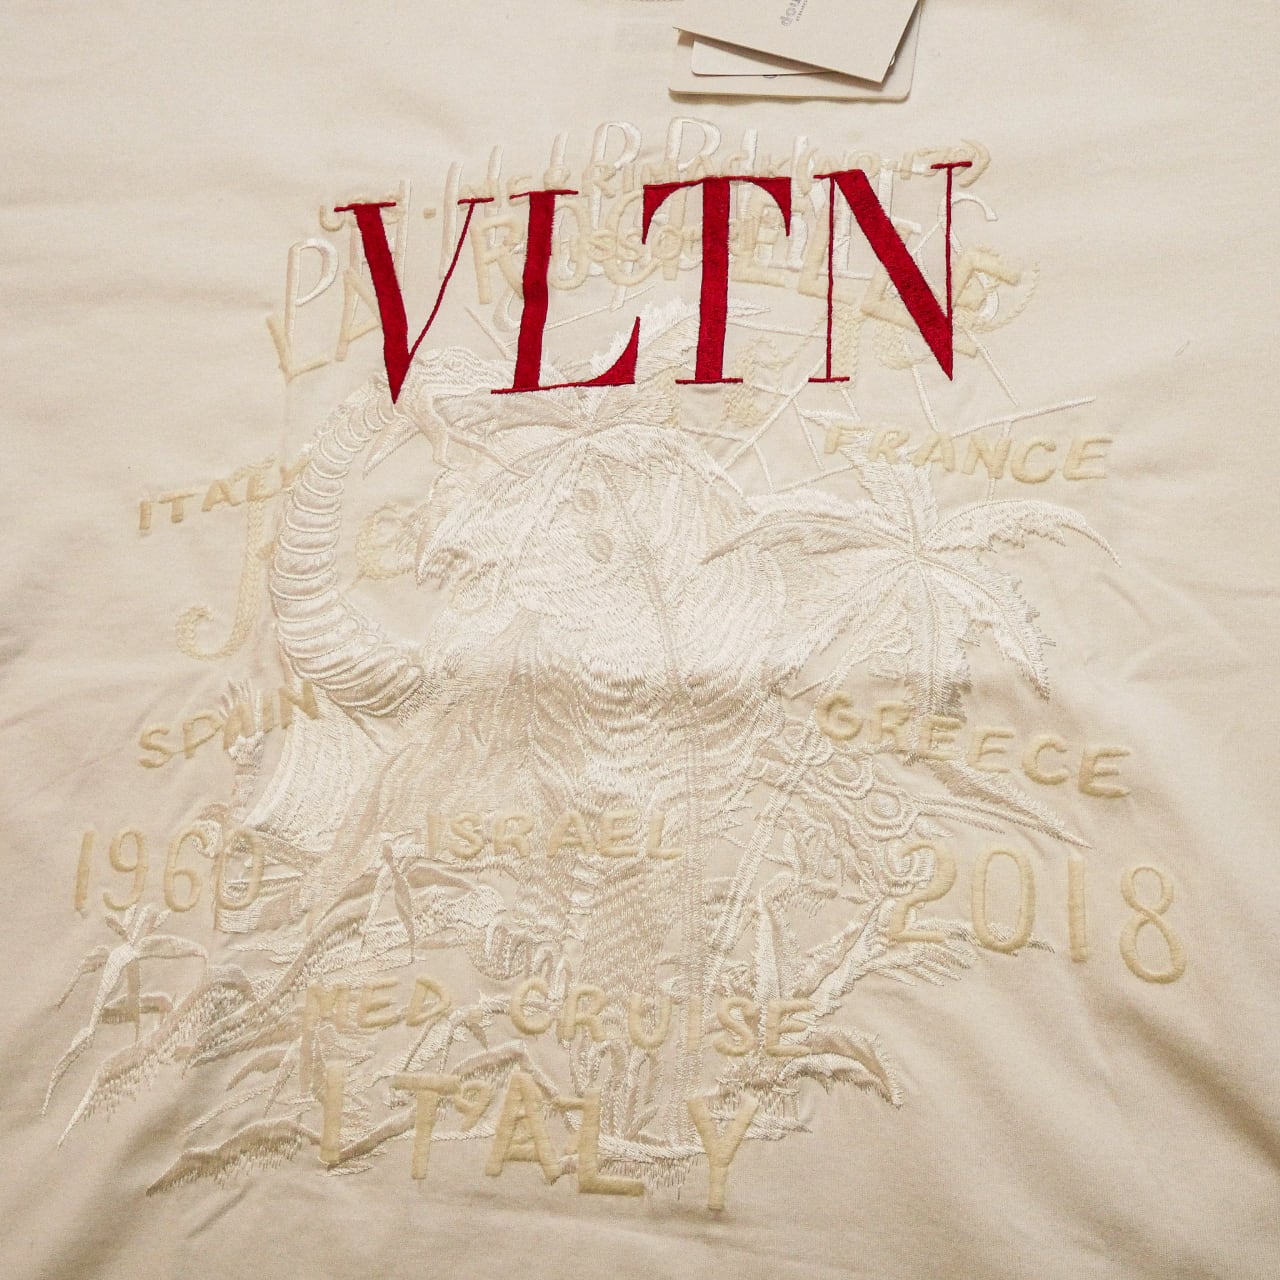 DOUBLET x valentino コラボ 刺繍 Tシャツ サイズL ダブレット ヴァレンチノ | 3RD[i]VISION USED SHOP